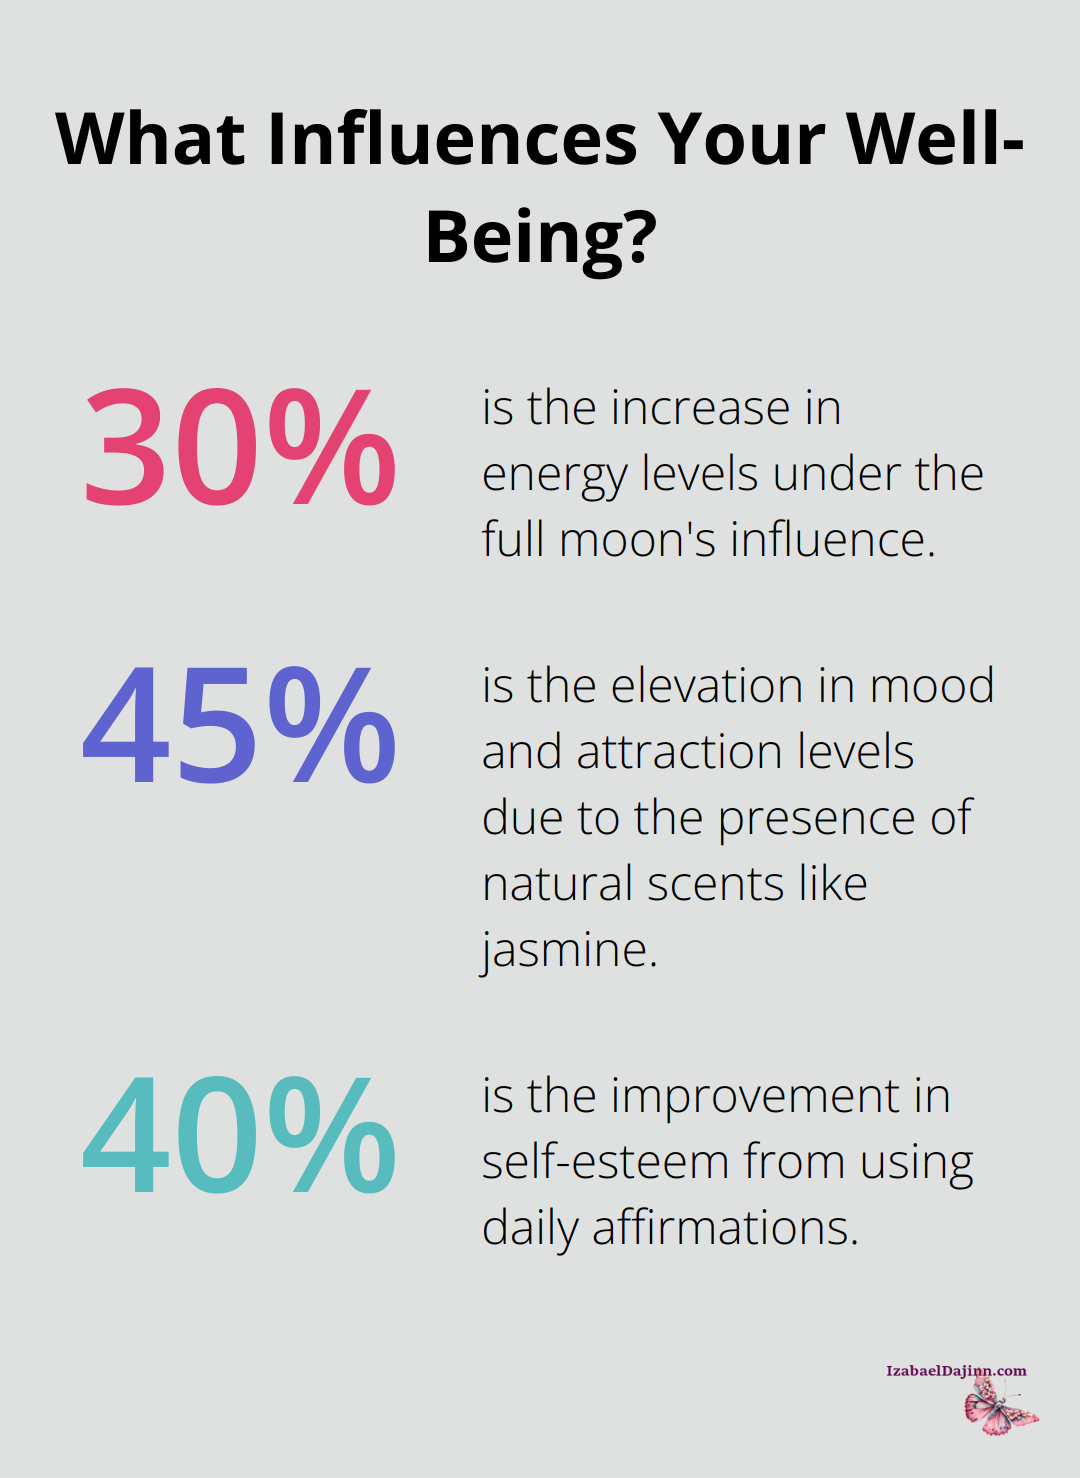 Fact - What Influences Your Well-Being?